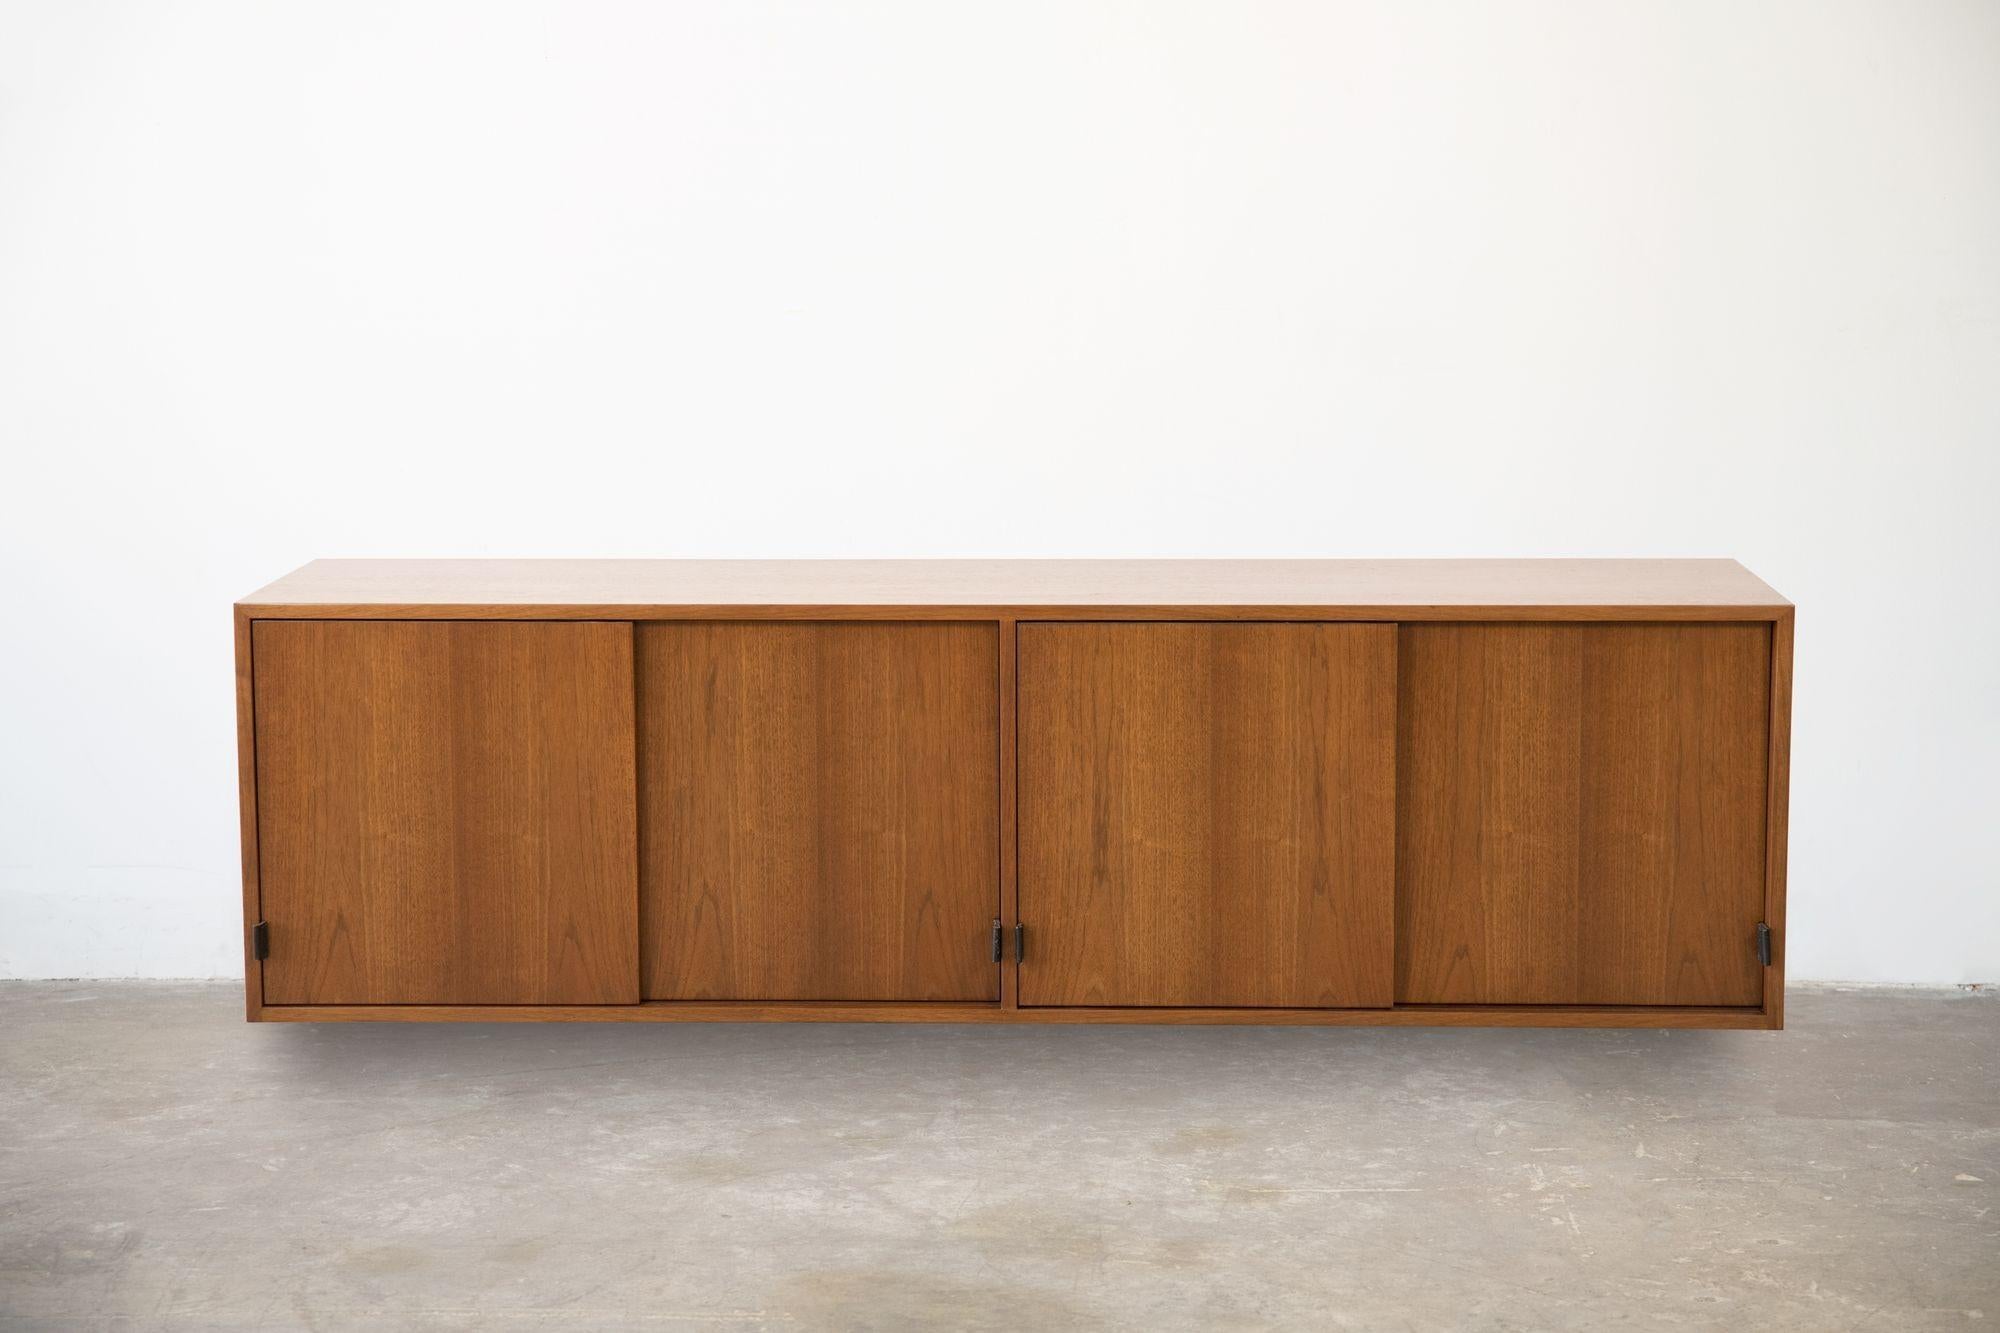 Early 1960s Florence Knoll designed wall-mount credenza with combed grain oak interiors.
Refinished and ready to install. We have two matching cabinets currently available. Original Leather pulls intact. Label on the reverse.
 
Florence Knoll